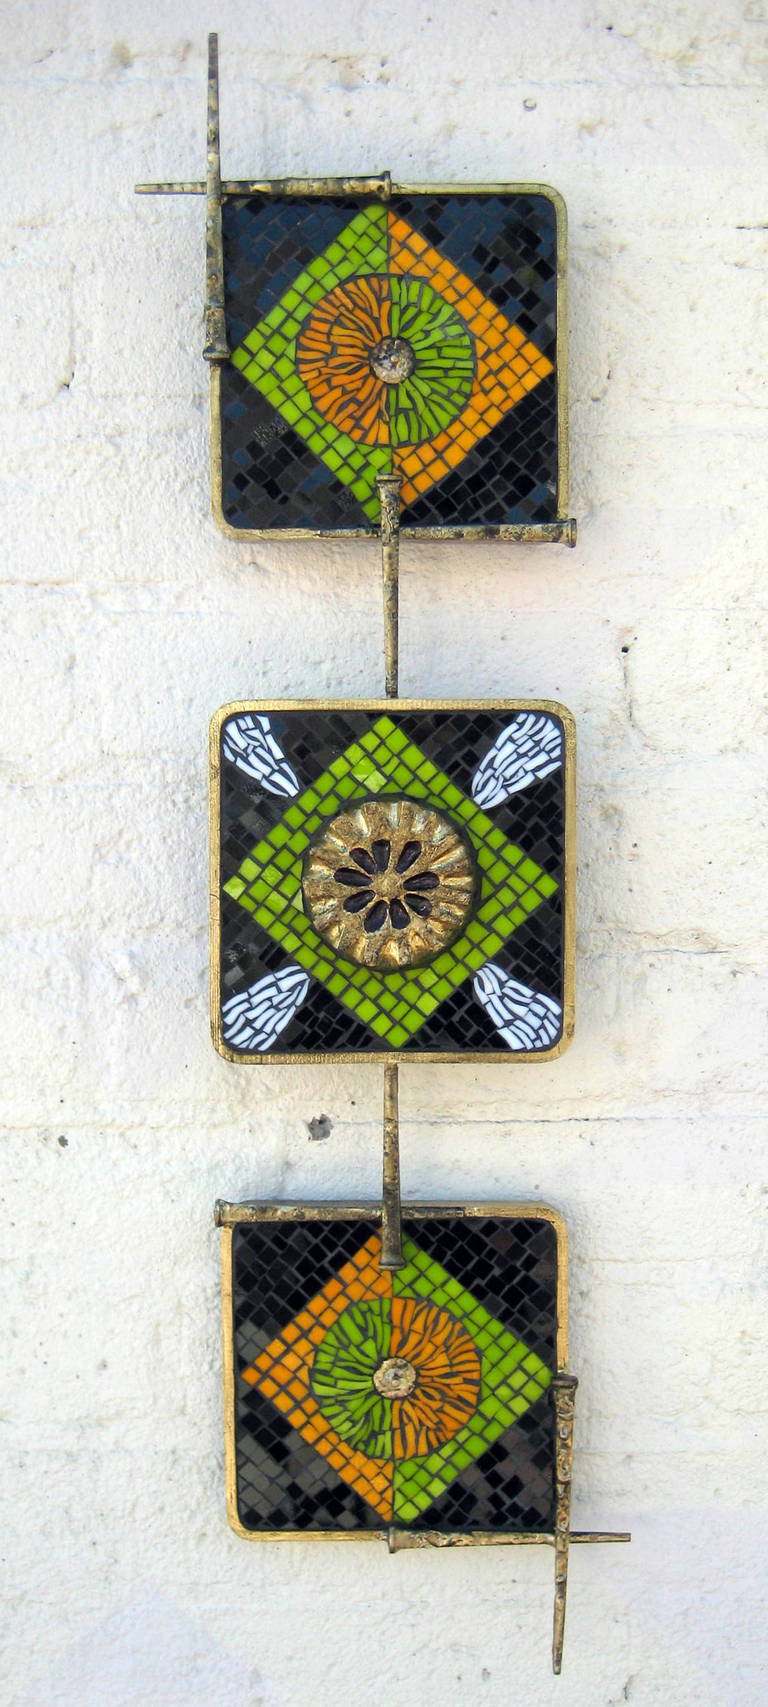 An original steel and glass mosaic wall sculpture by Del and Brenda Williams.